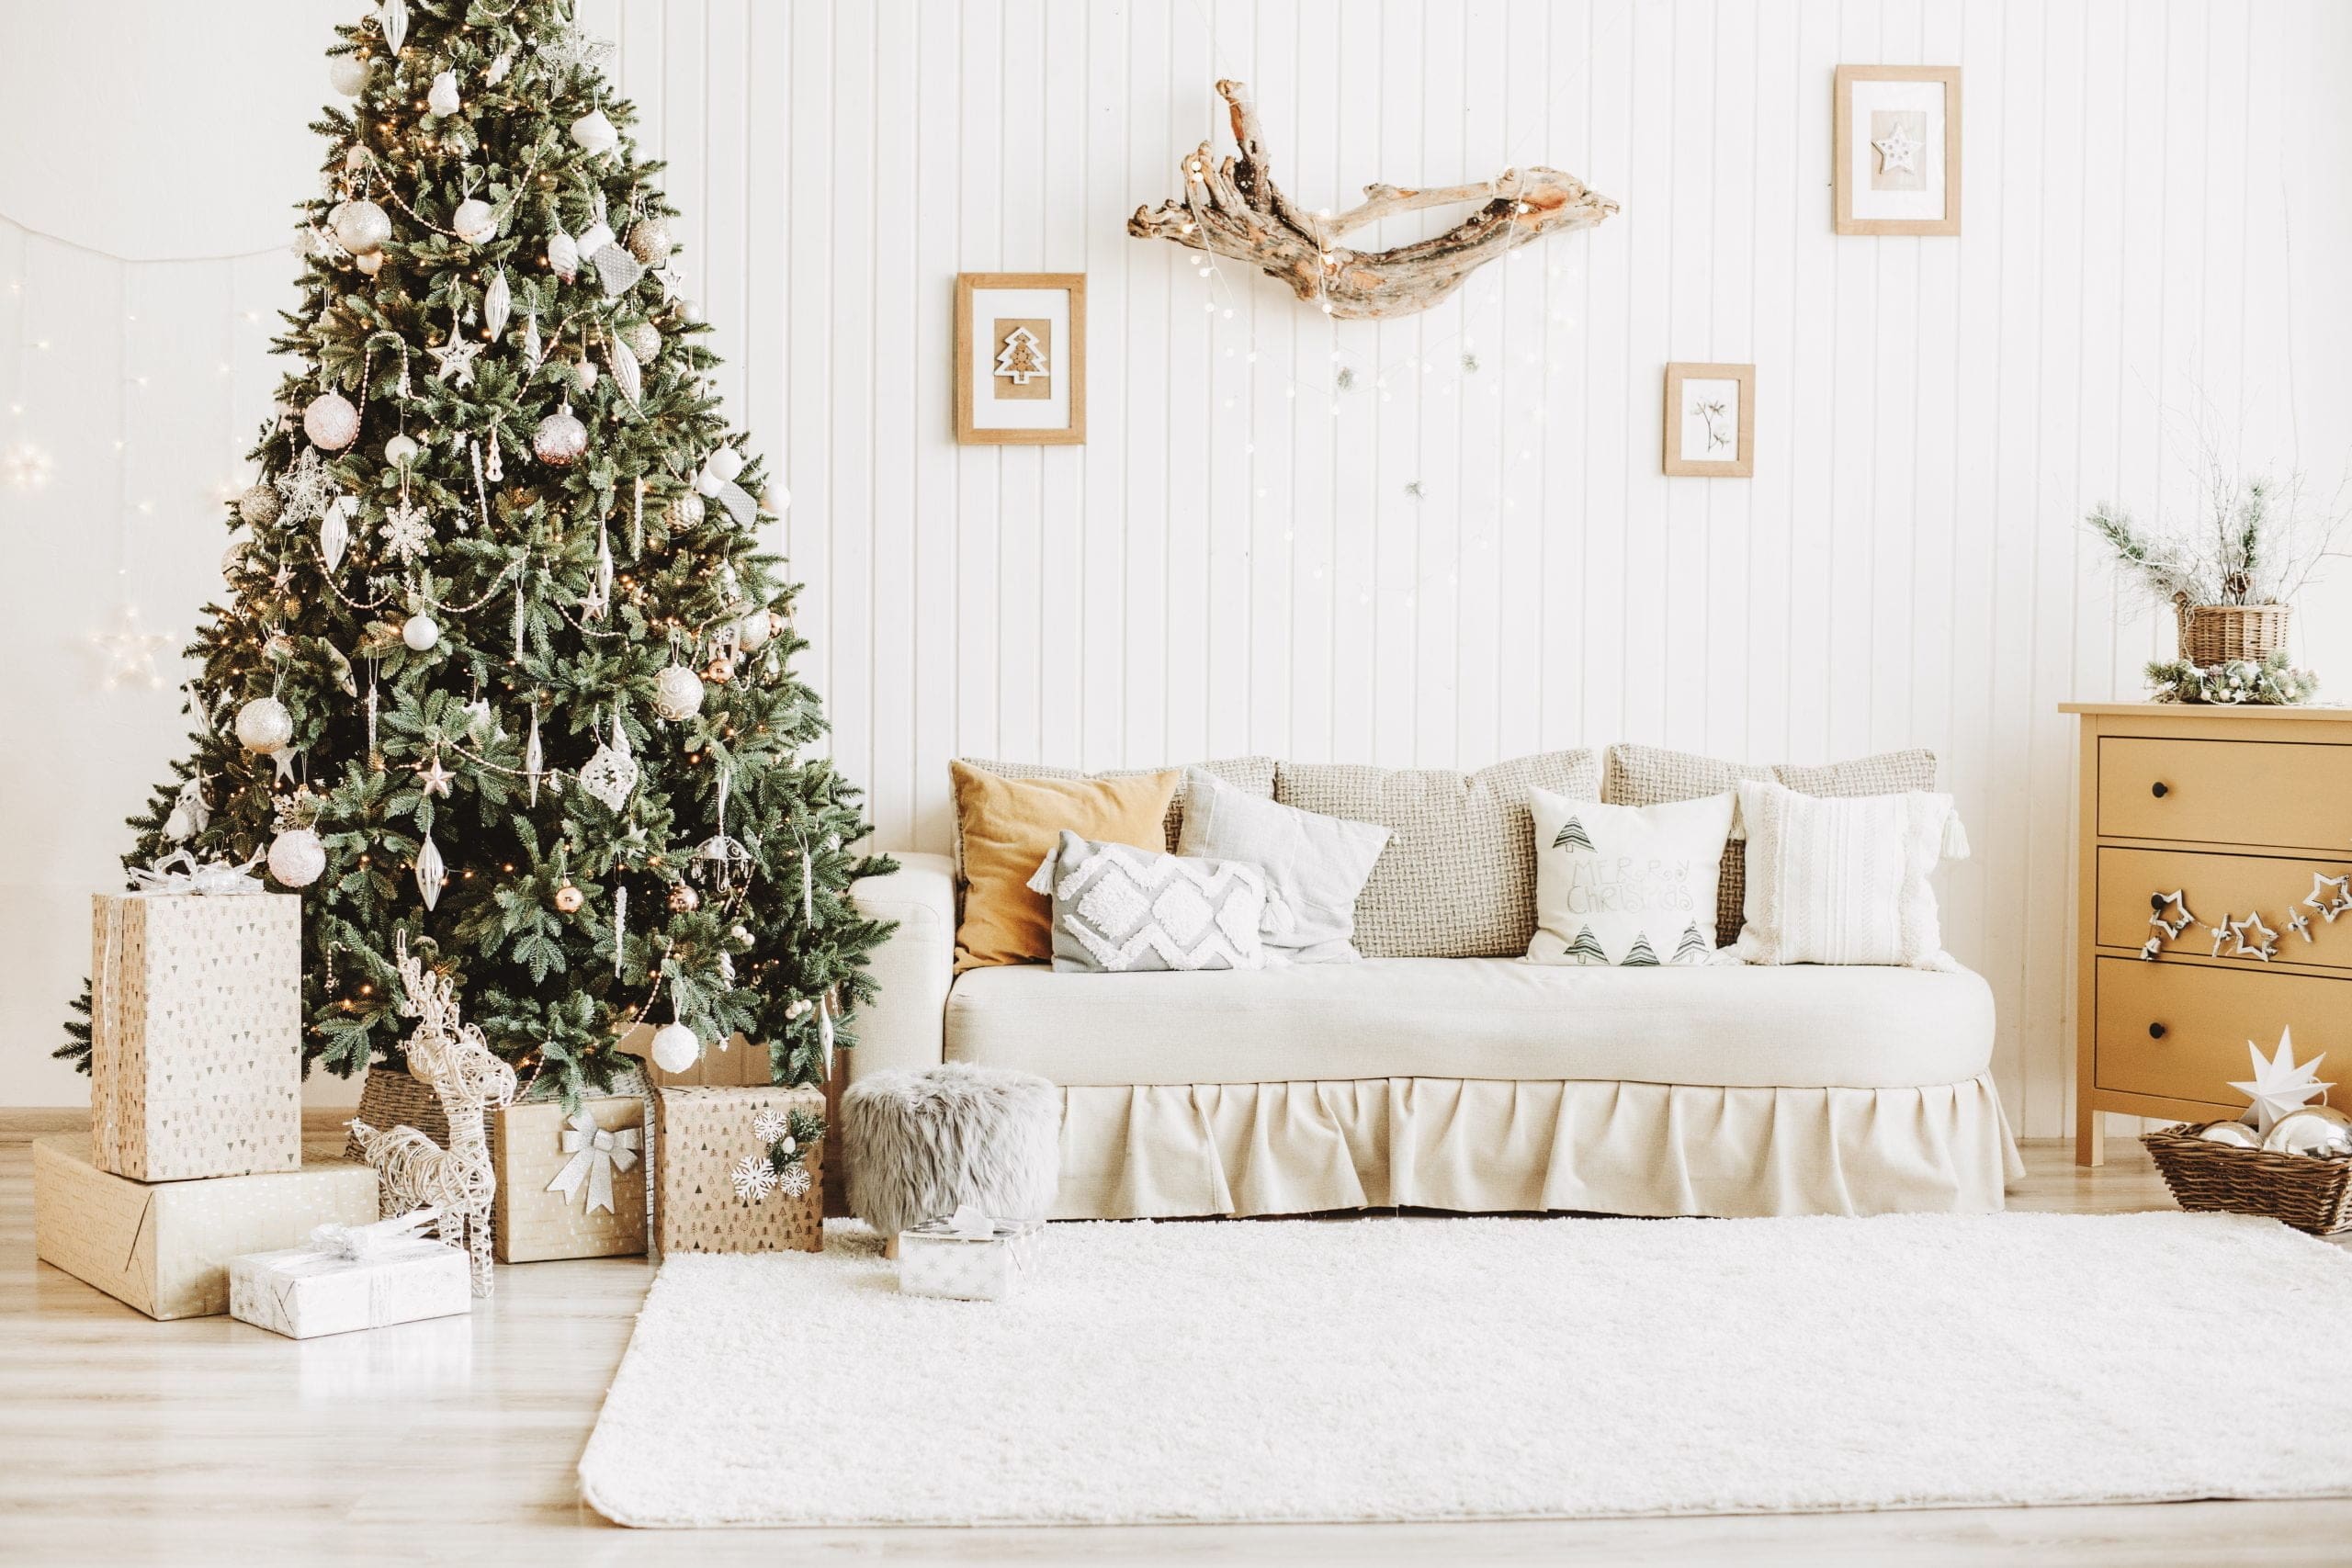 decorating your new home for the holidays with simple neutral rustic palette in living room